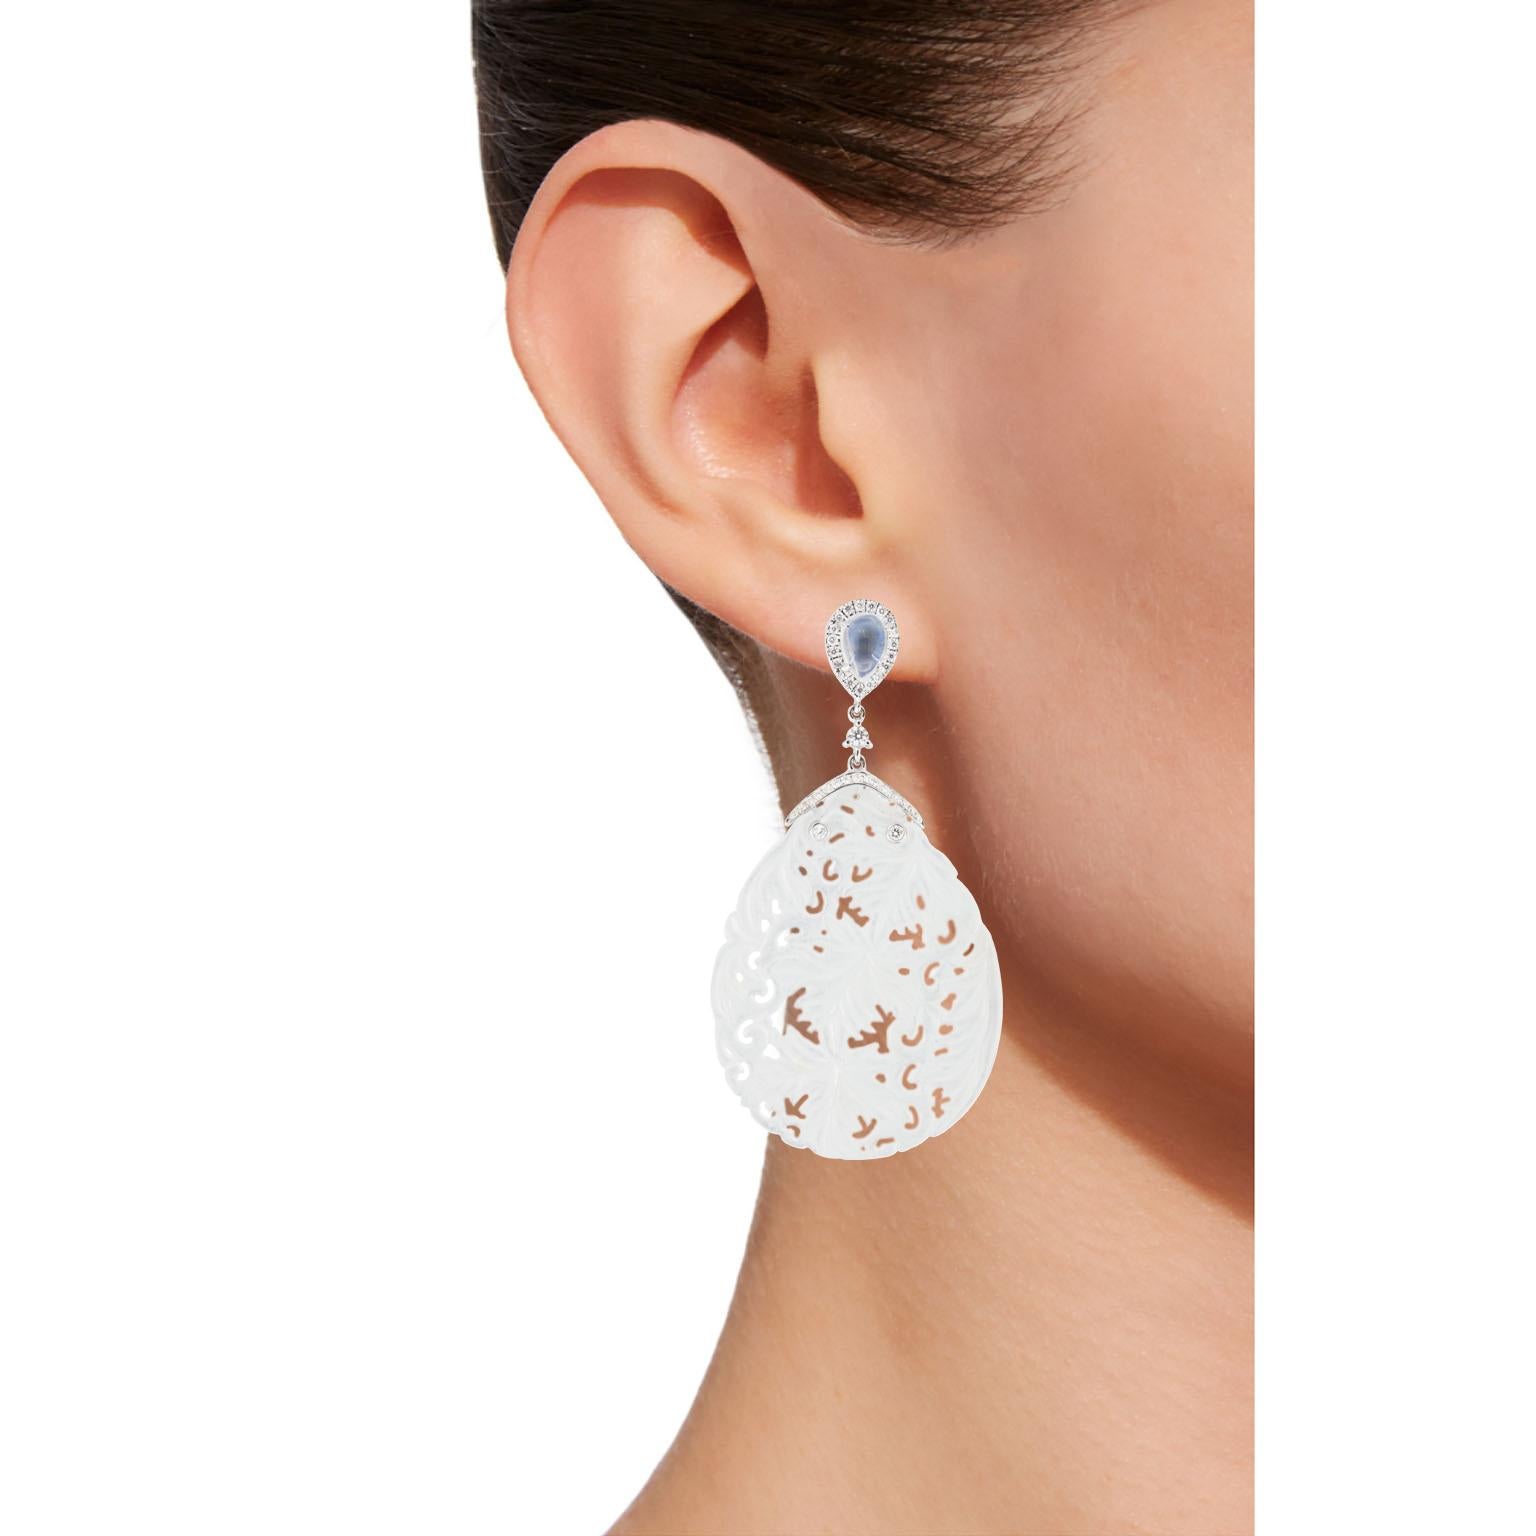 Jona design collection, hand crafted in Italy, 18 karat white gold carved Burmese Jade One of a Kind pendant earrings.
Dimension: L 2.36 in / 6 cm X W 1.23 in / 31.24 mm 
Depth : from 0.072 in / 1.84 mm to 0.24 in/ 6. 23 mm 
Weight : 12.3 g
All Jona